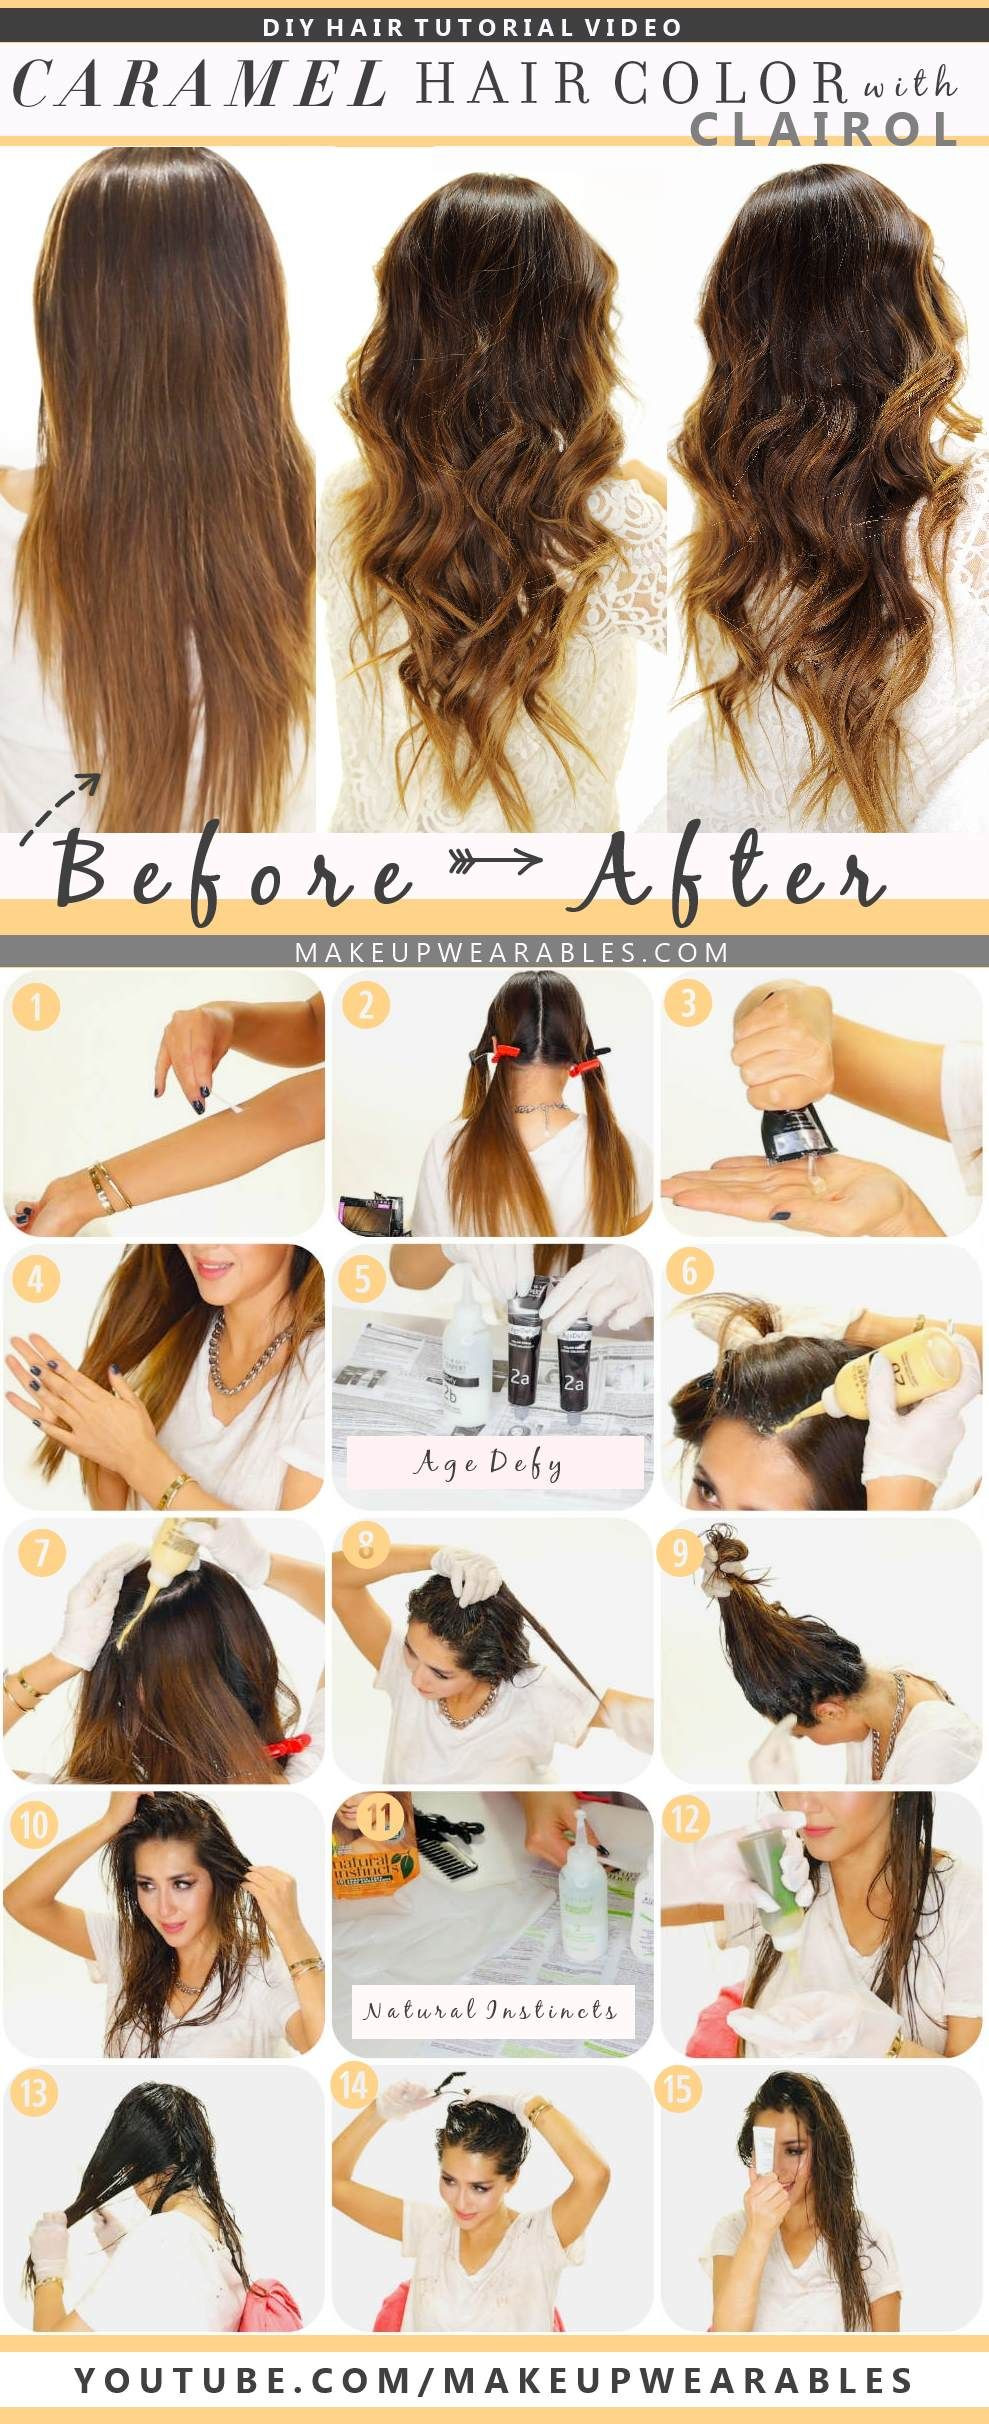 How To DIY Ombre Hair
 How to Color Hair at Home Caramel Brown Ombre